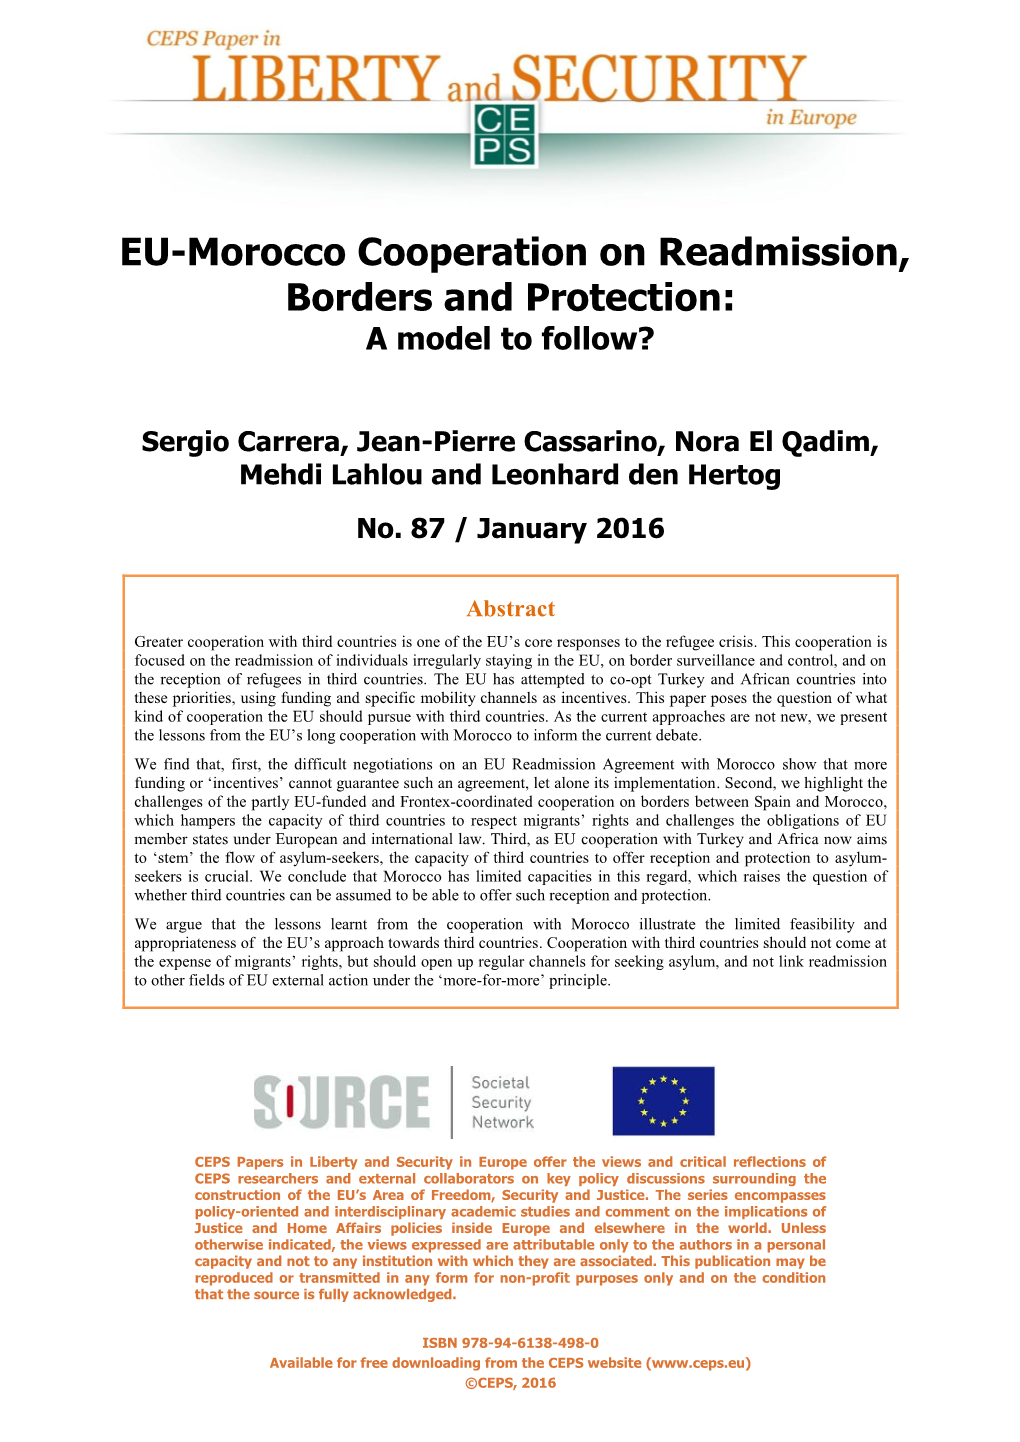 EU-Morocco Cooperation on Readmission, Borders and Protection: a Model to Follow?